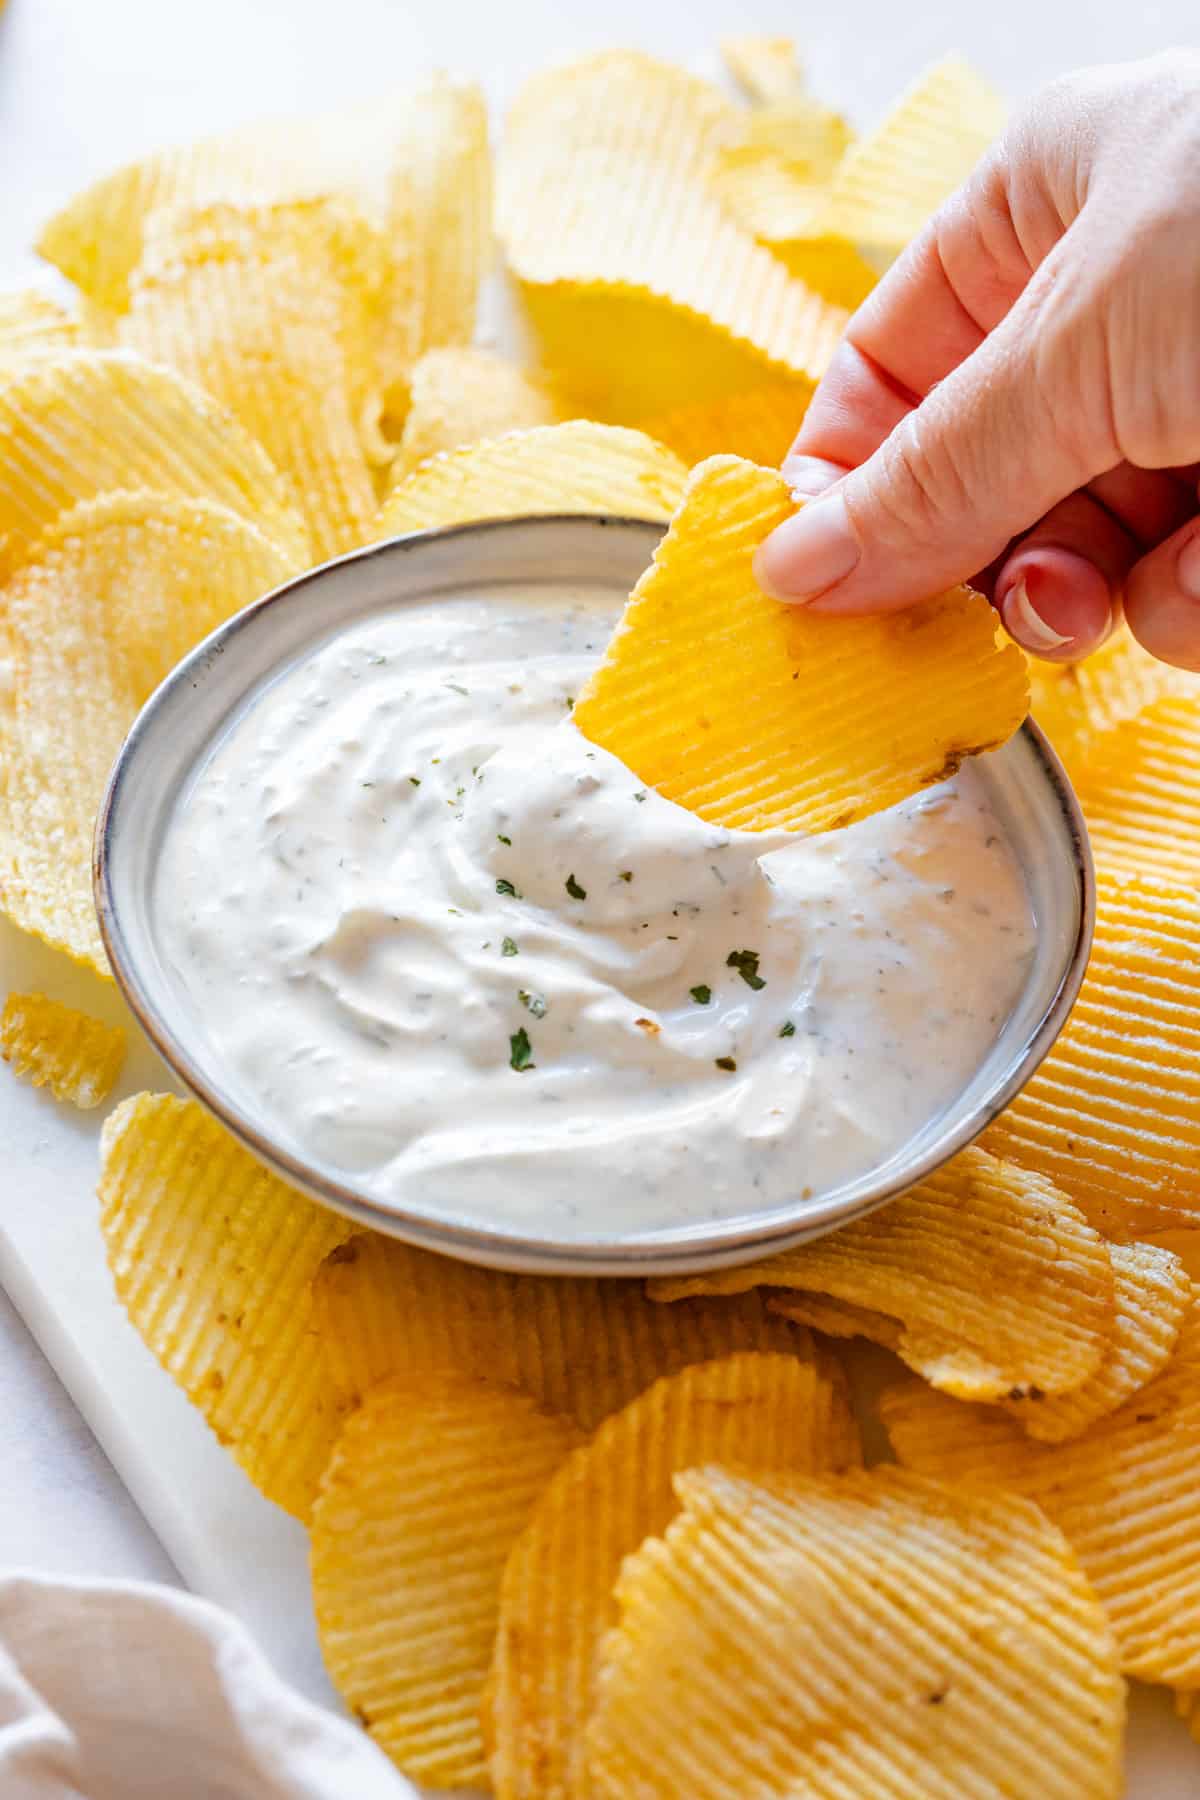 Julia's hand dipping potato chip in creamy chip dip.